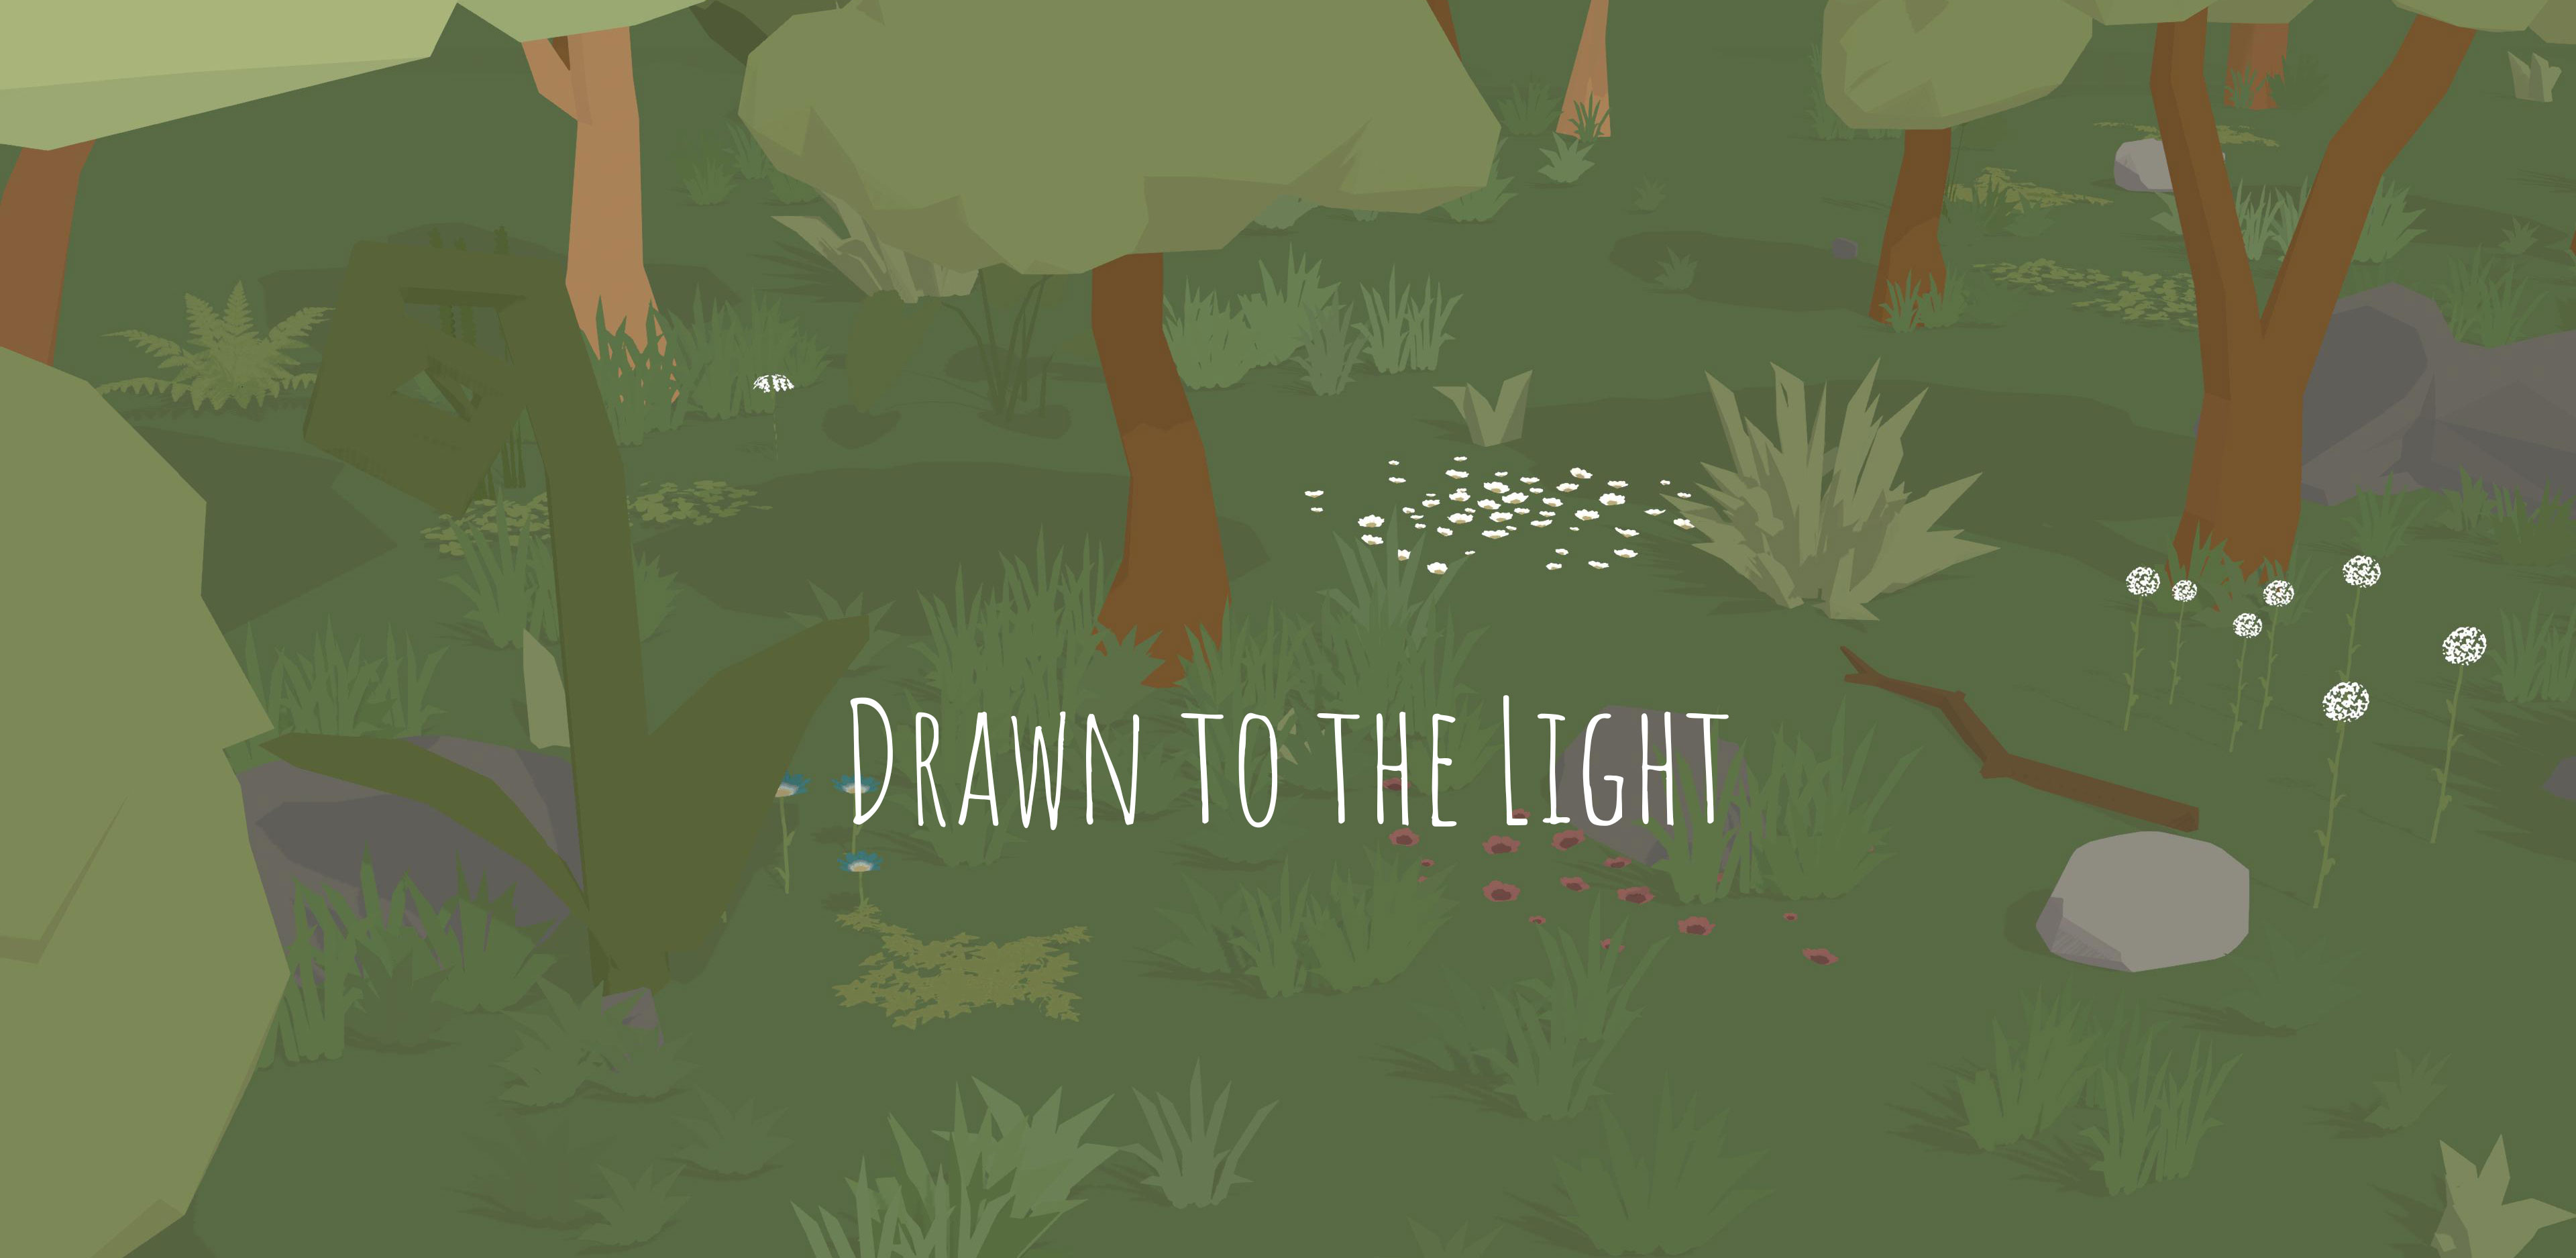 Drawn to the Light game featured image showing a dark forest centered ...